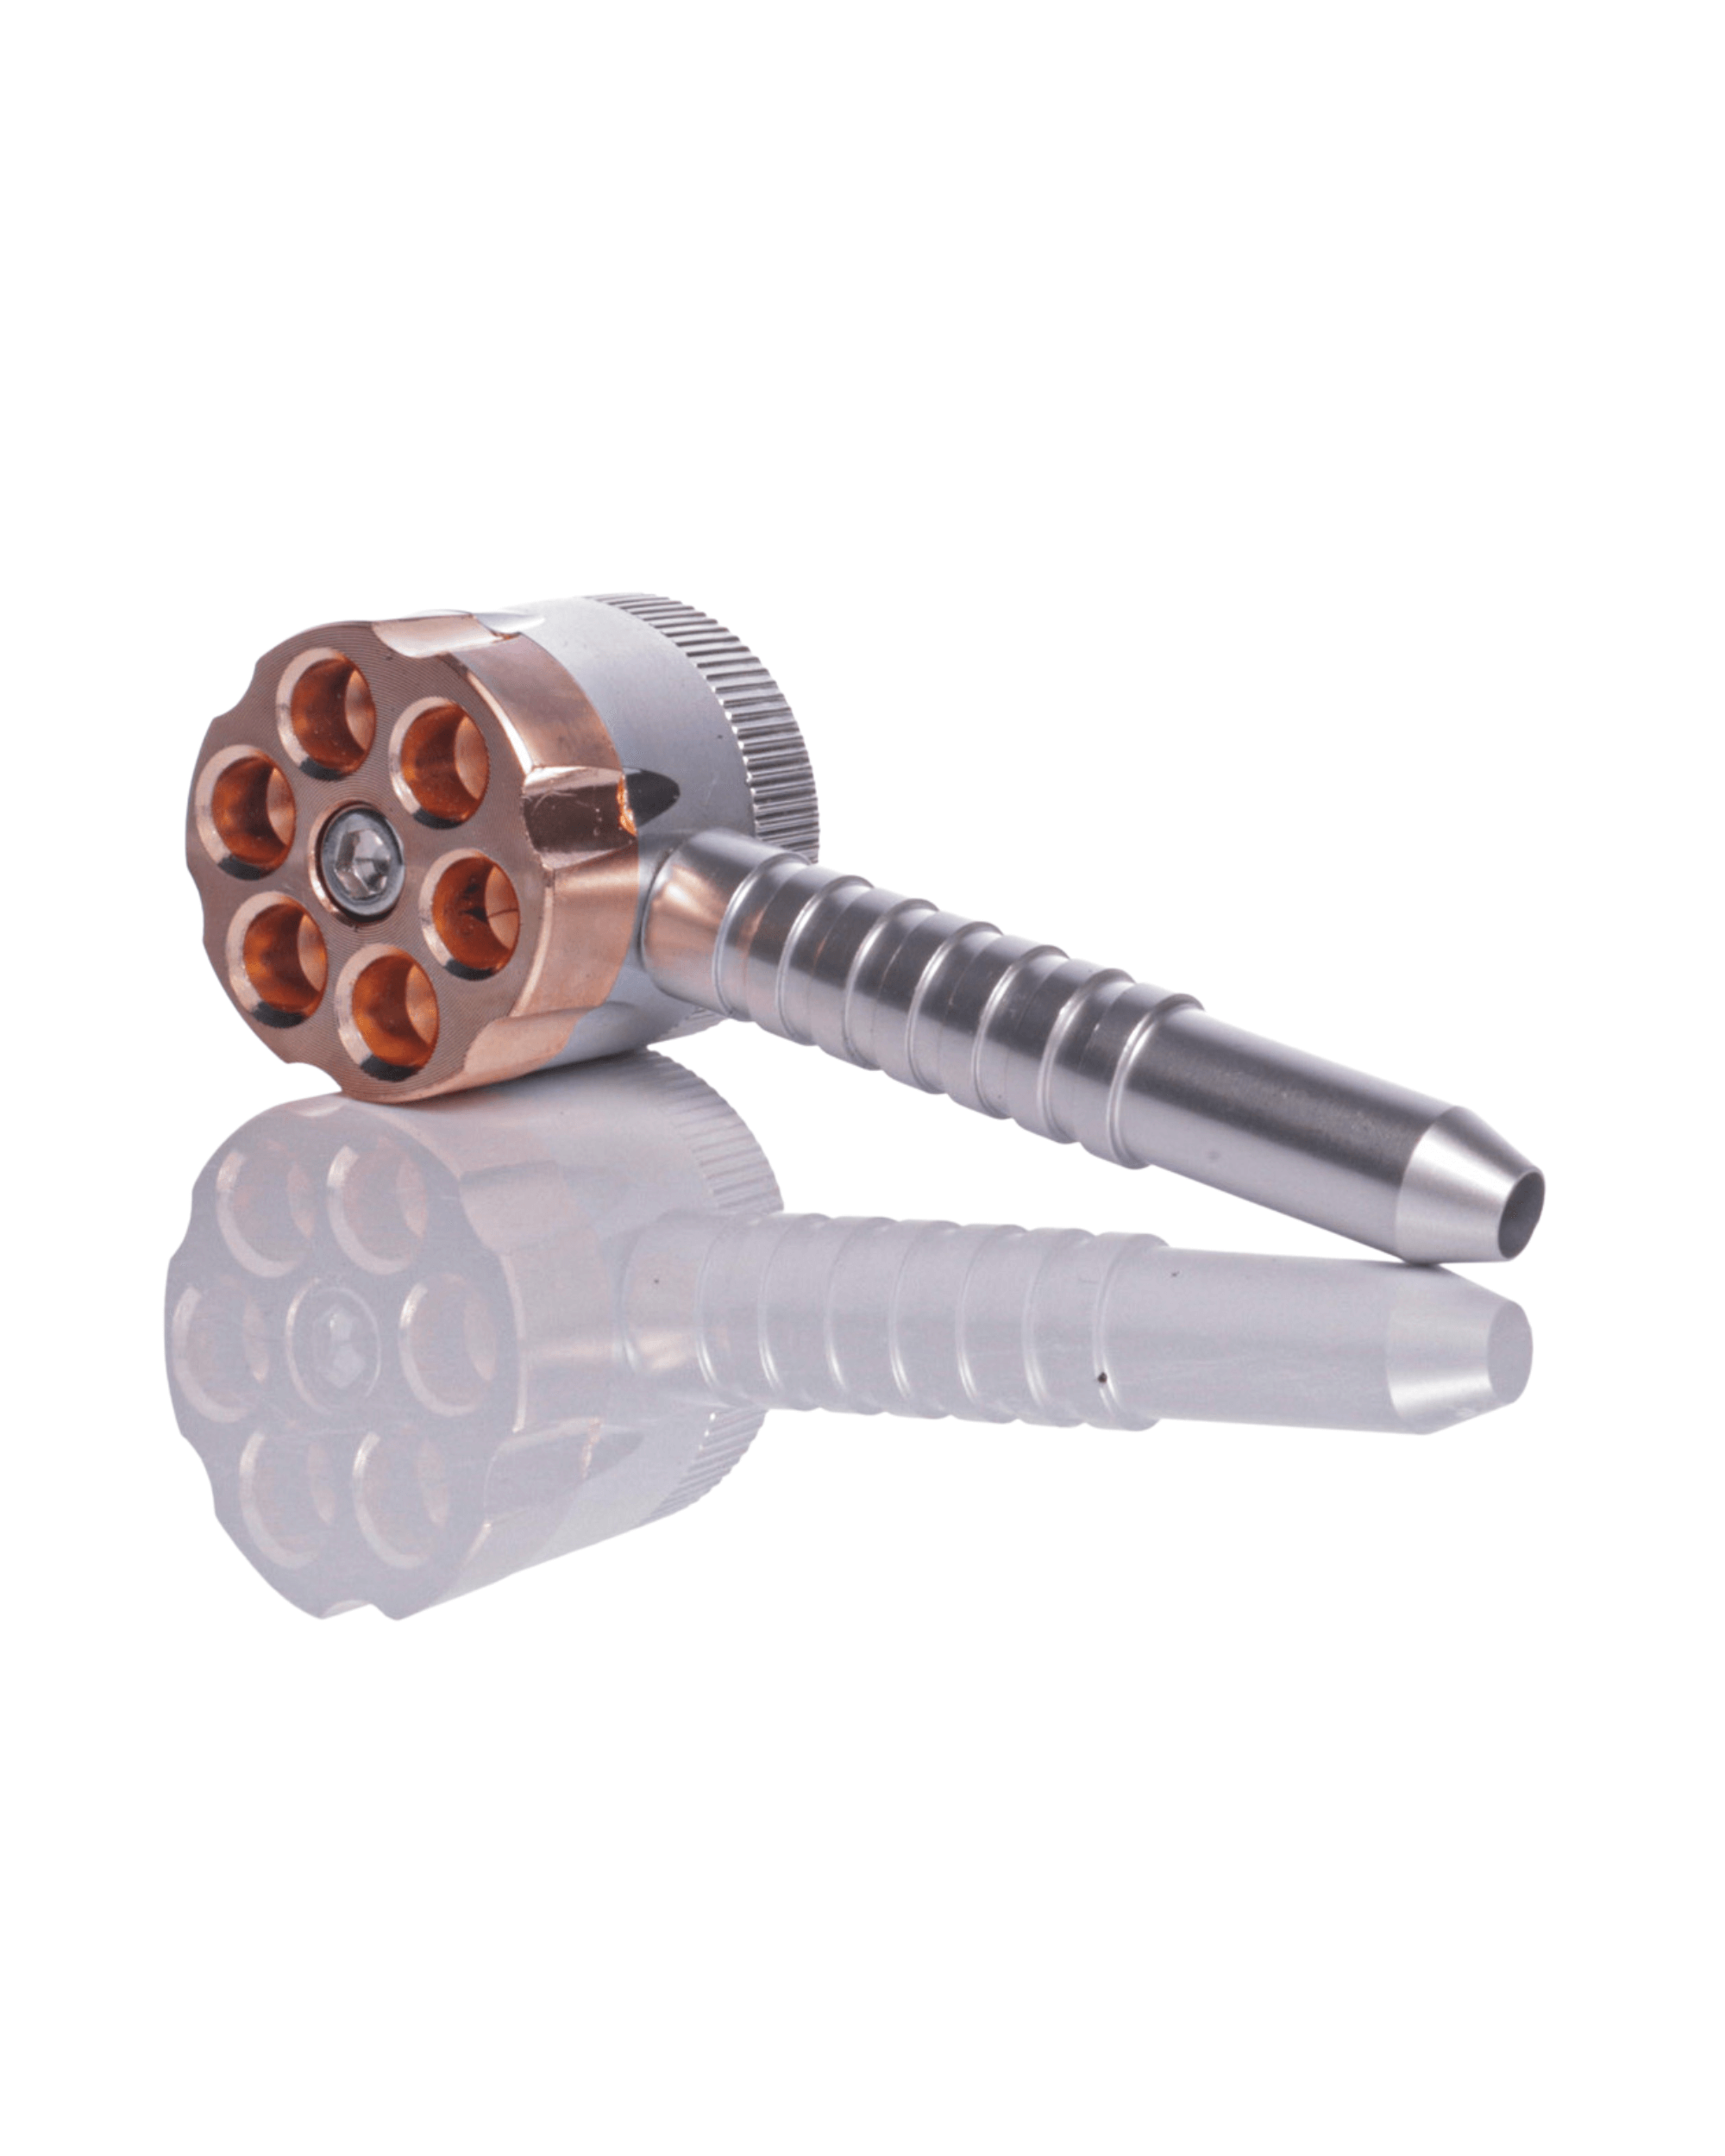 6 Chamber Revolver Metal Pipe & Weed Grinder - World of Bongs